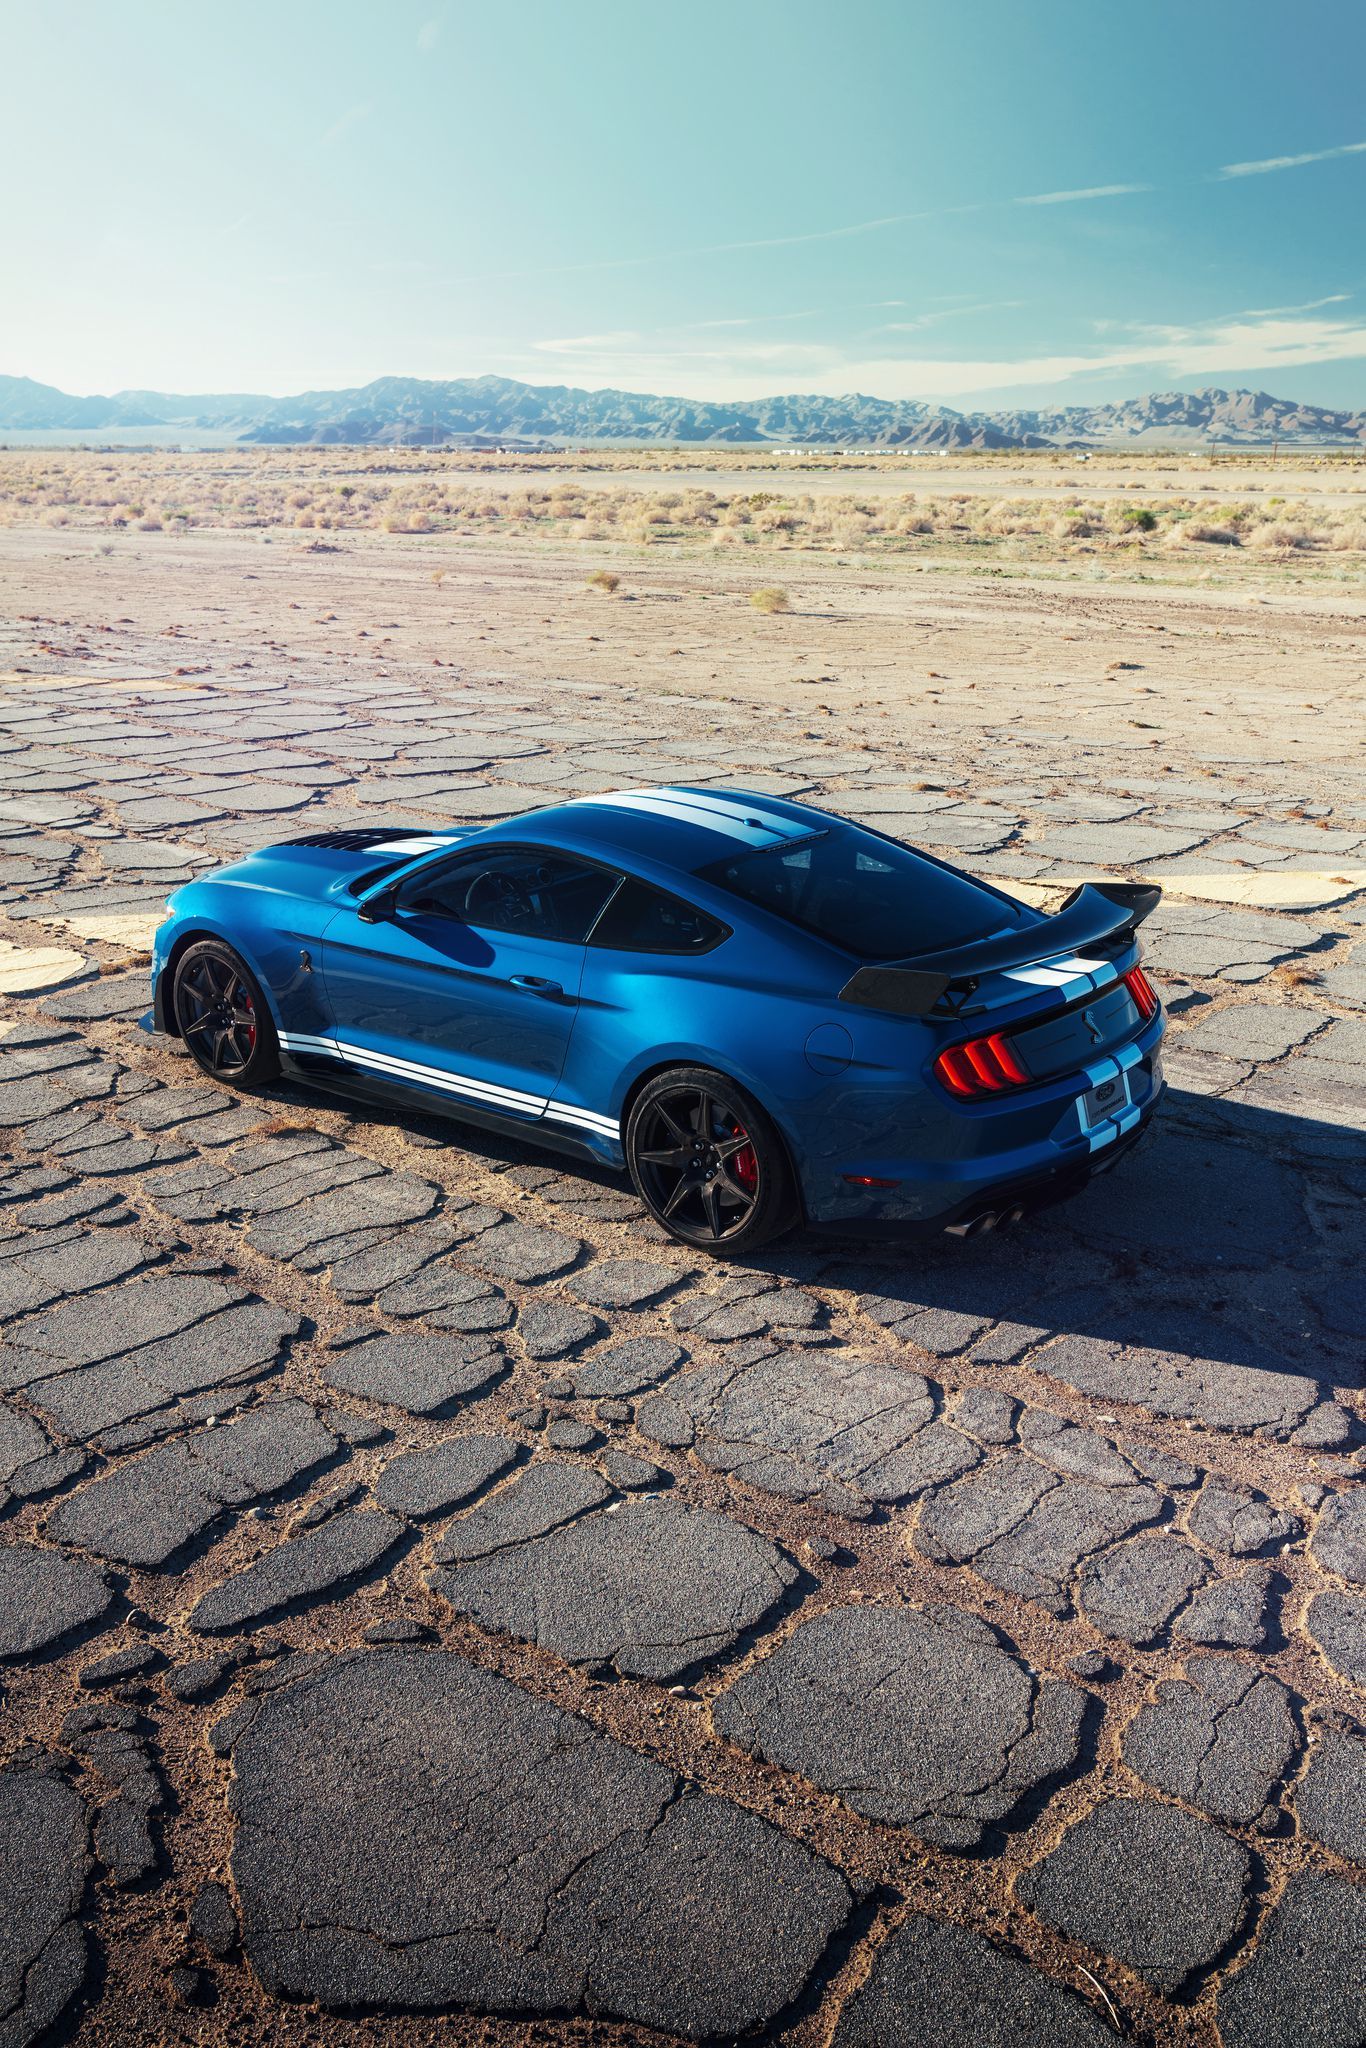 Ford Mustang Shelby Gt500 iPhone .fordmustang2019.blogspot.com